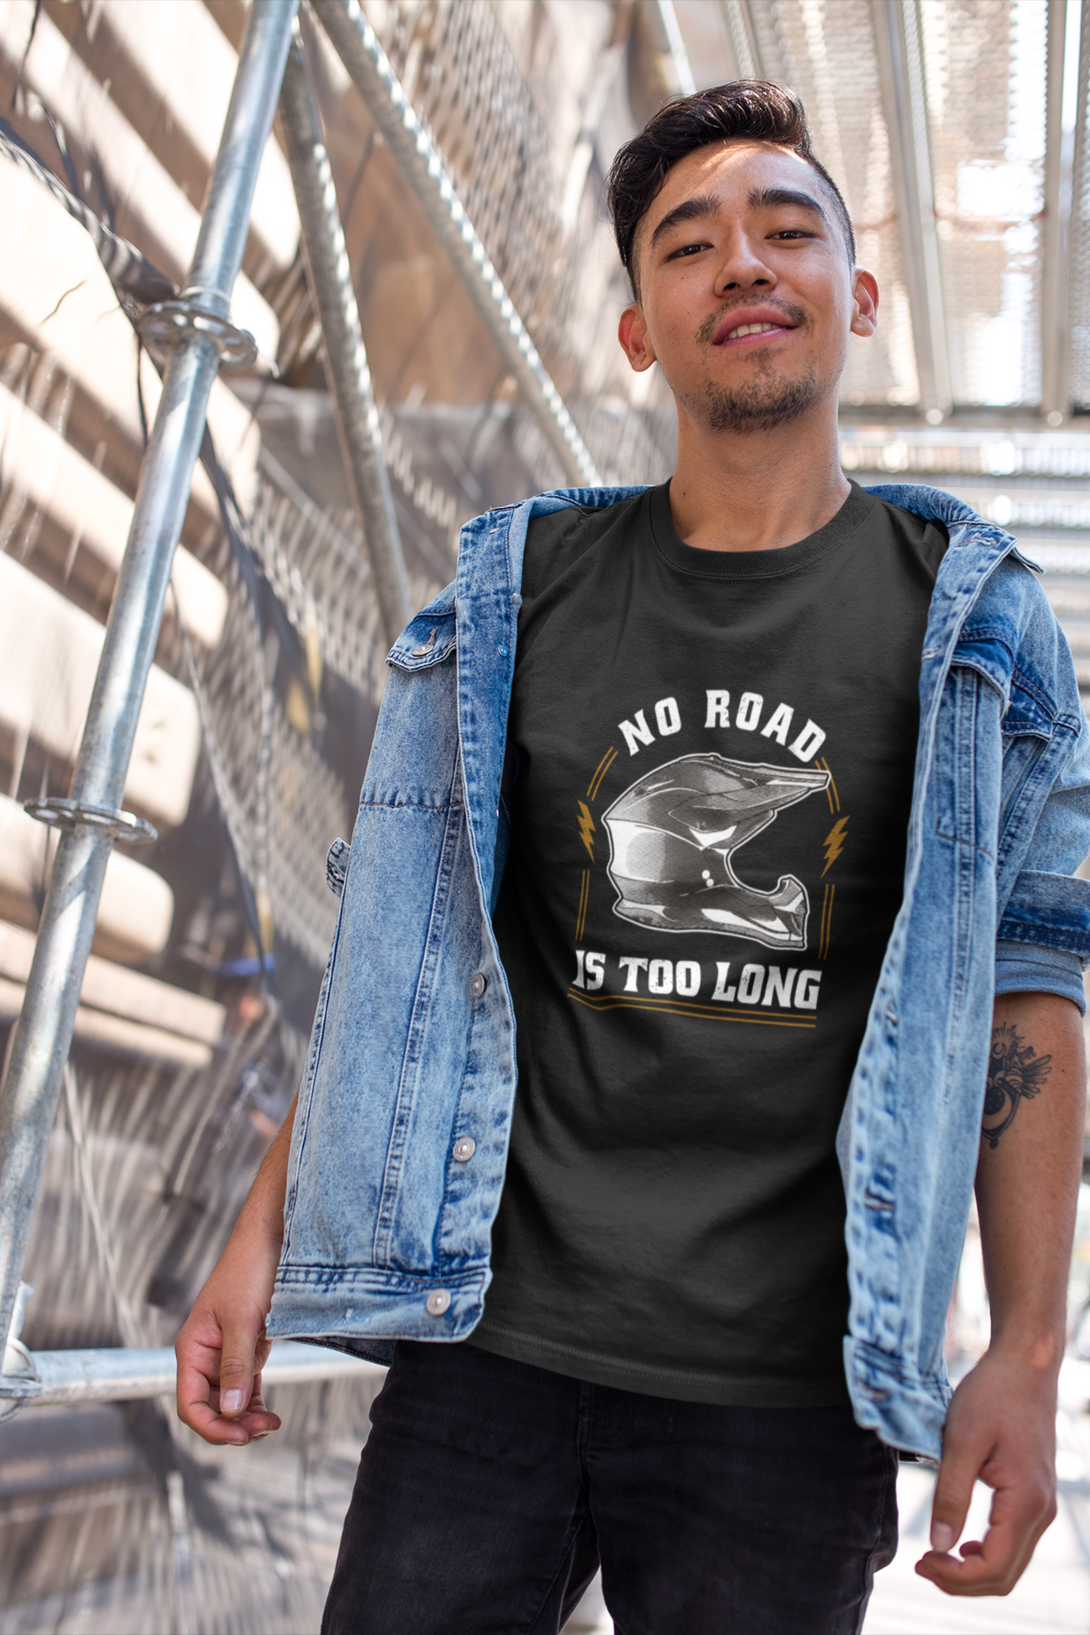 No Road Is Too Long Printed T-Shirt For Men - WowWaves - 5